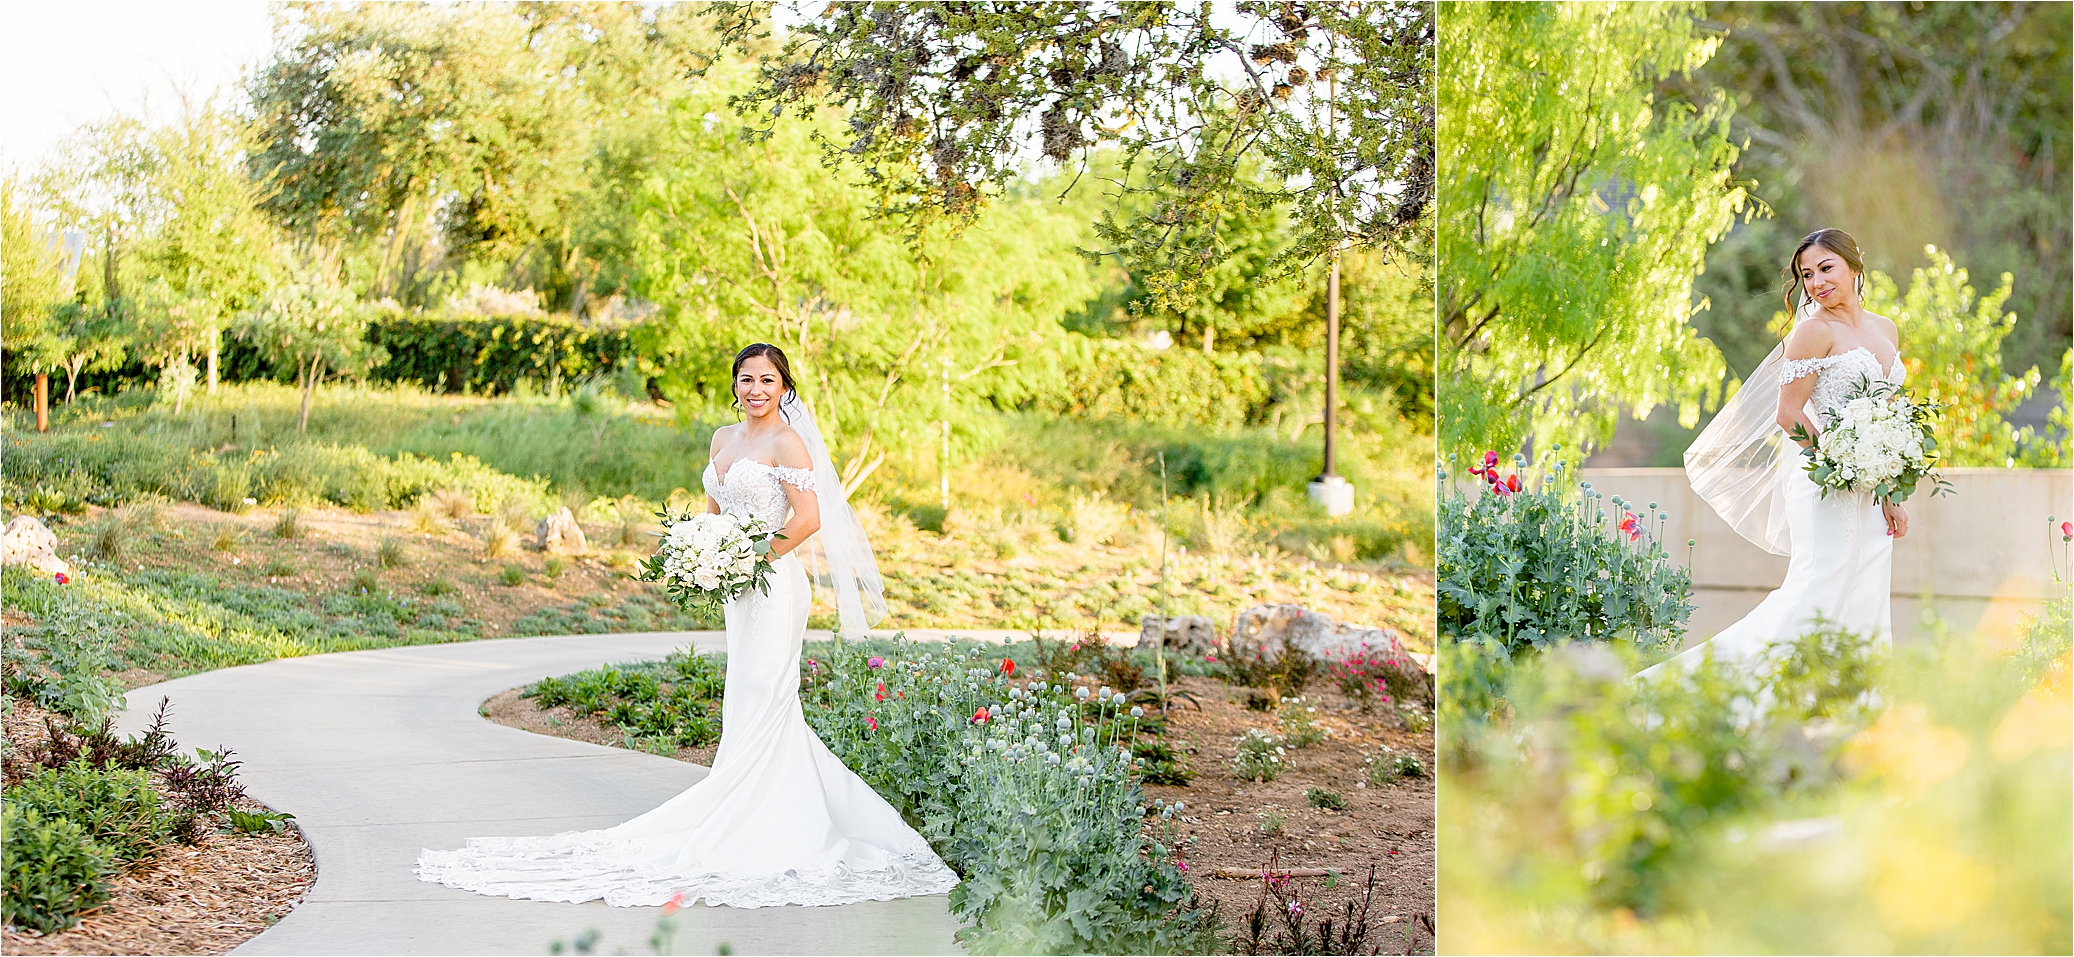 A bride smiles and holds her bouquet during her bridal portraits with Jillian Hogan Photography at San Antonio Botanic Garden